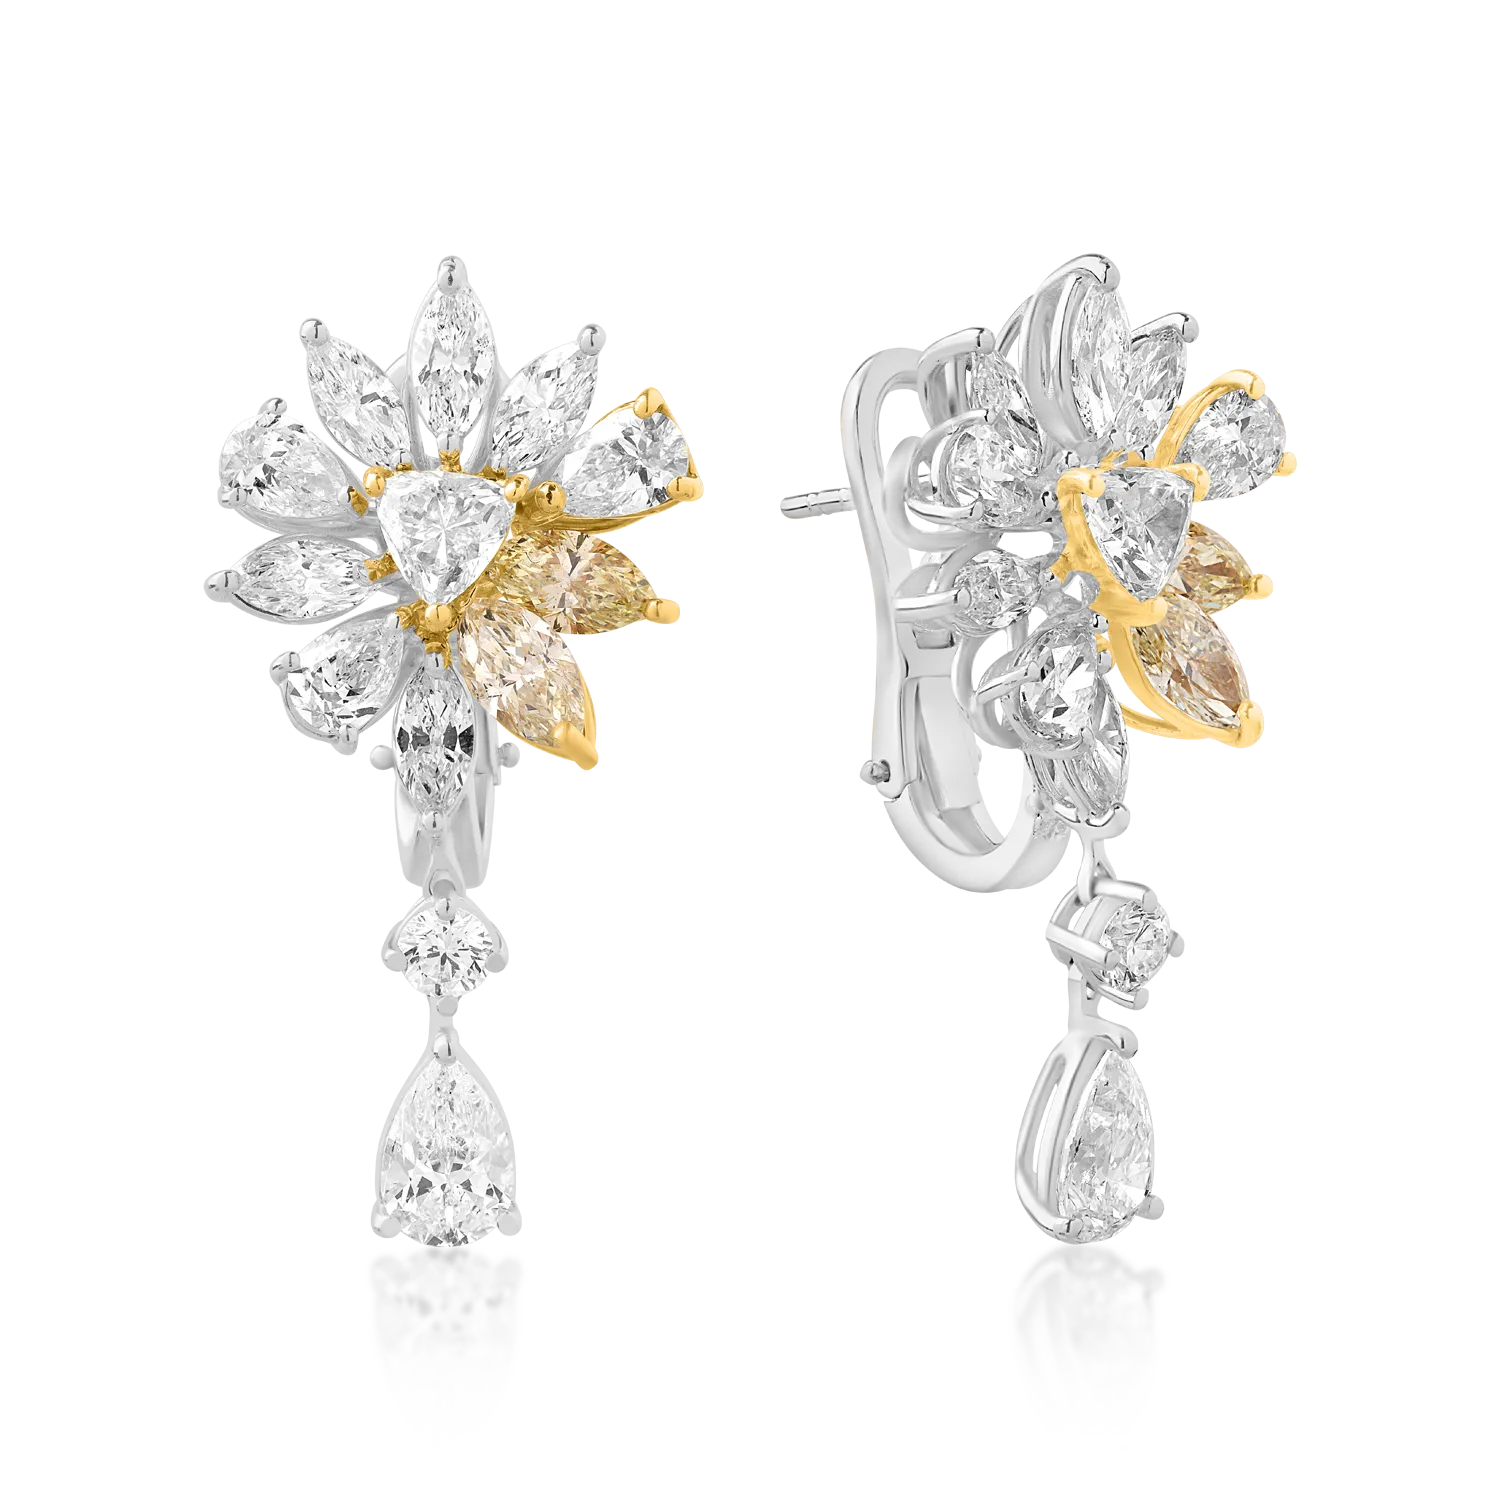 18K white-yellow gold earrings with 2.94ct clear diamonds and 1.22ct yellow diamonds